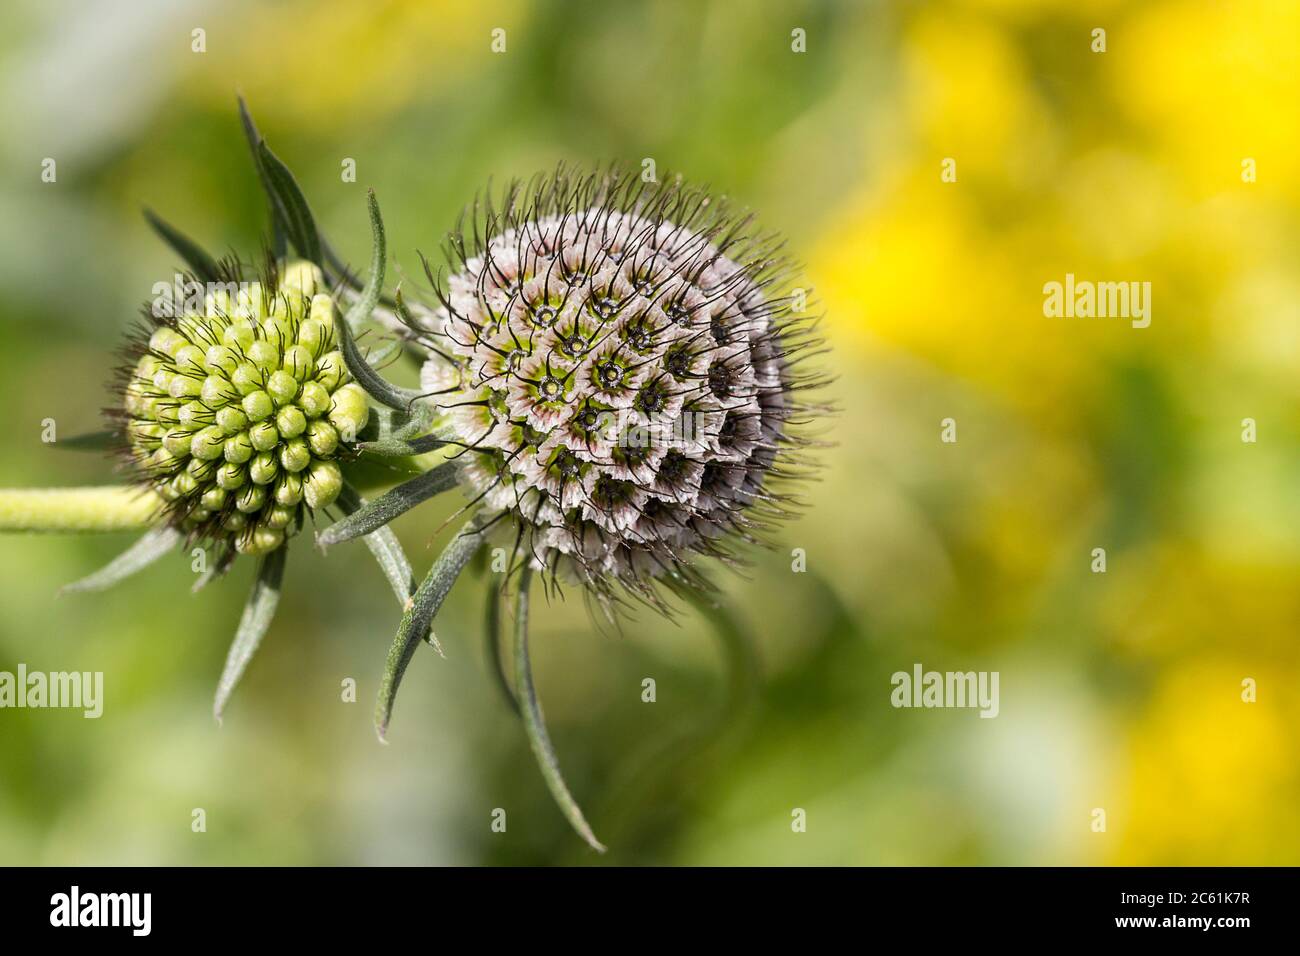 Field Scabious Knautia Arvensis Abstract Wild Plant Image Without Florets Known As Pincushion Flower Or Butterfly Blue Soft Green Yellow Background Stock Photo Alamy